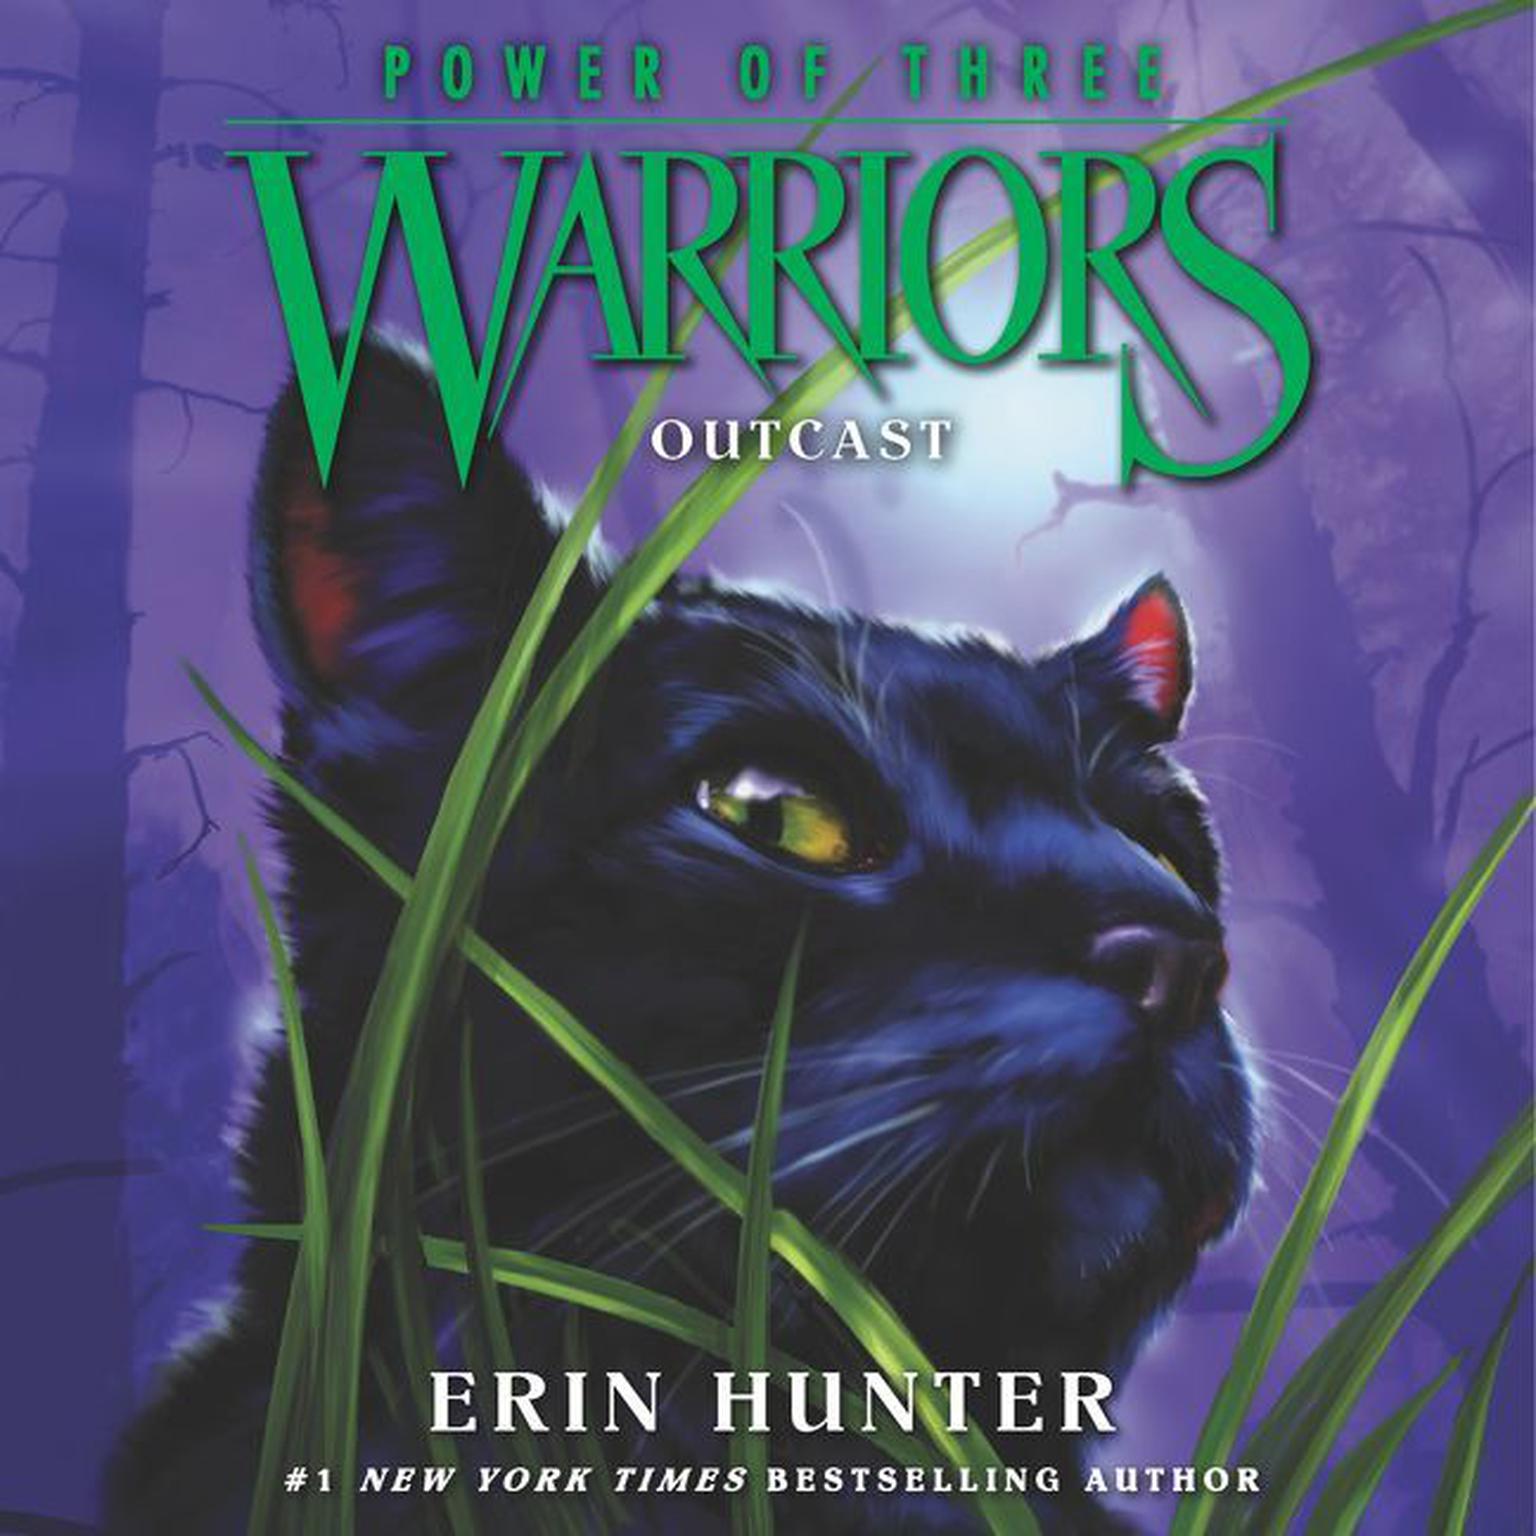 Warriors: Power of Three #3: Outcast Audiobook, by Erin Hunter